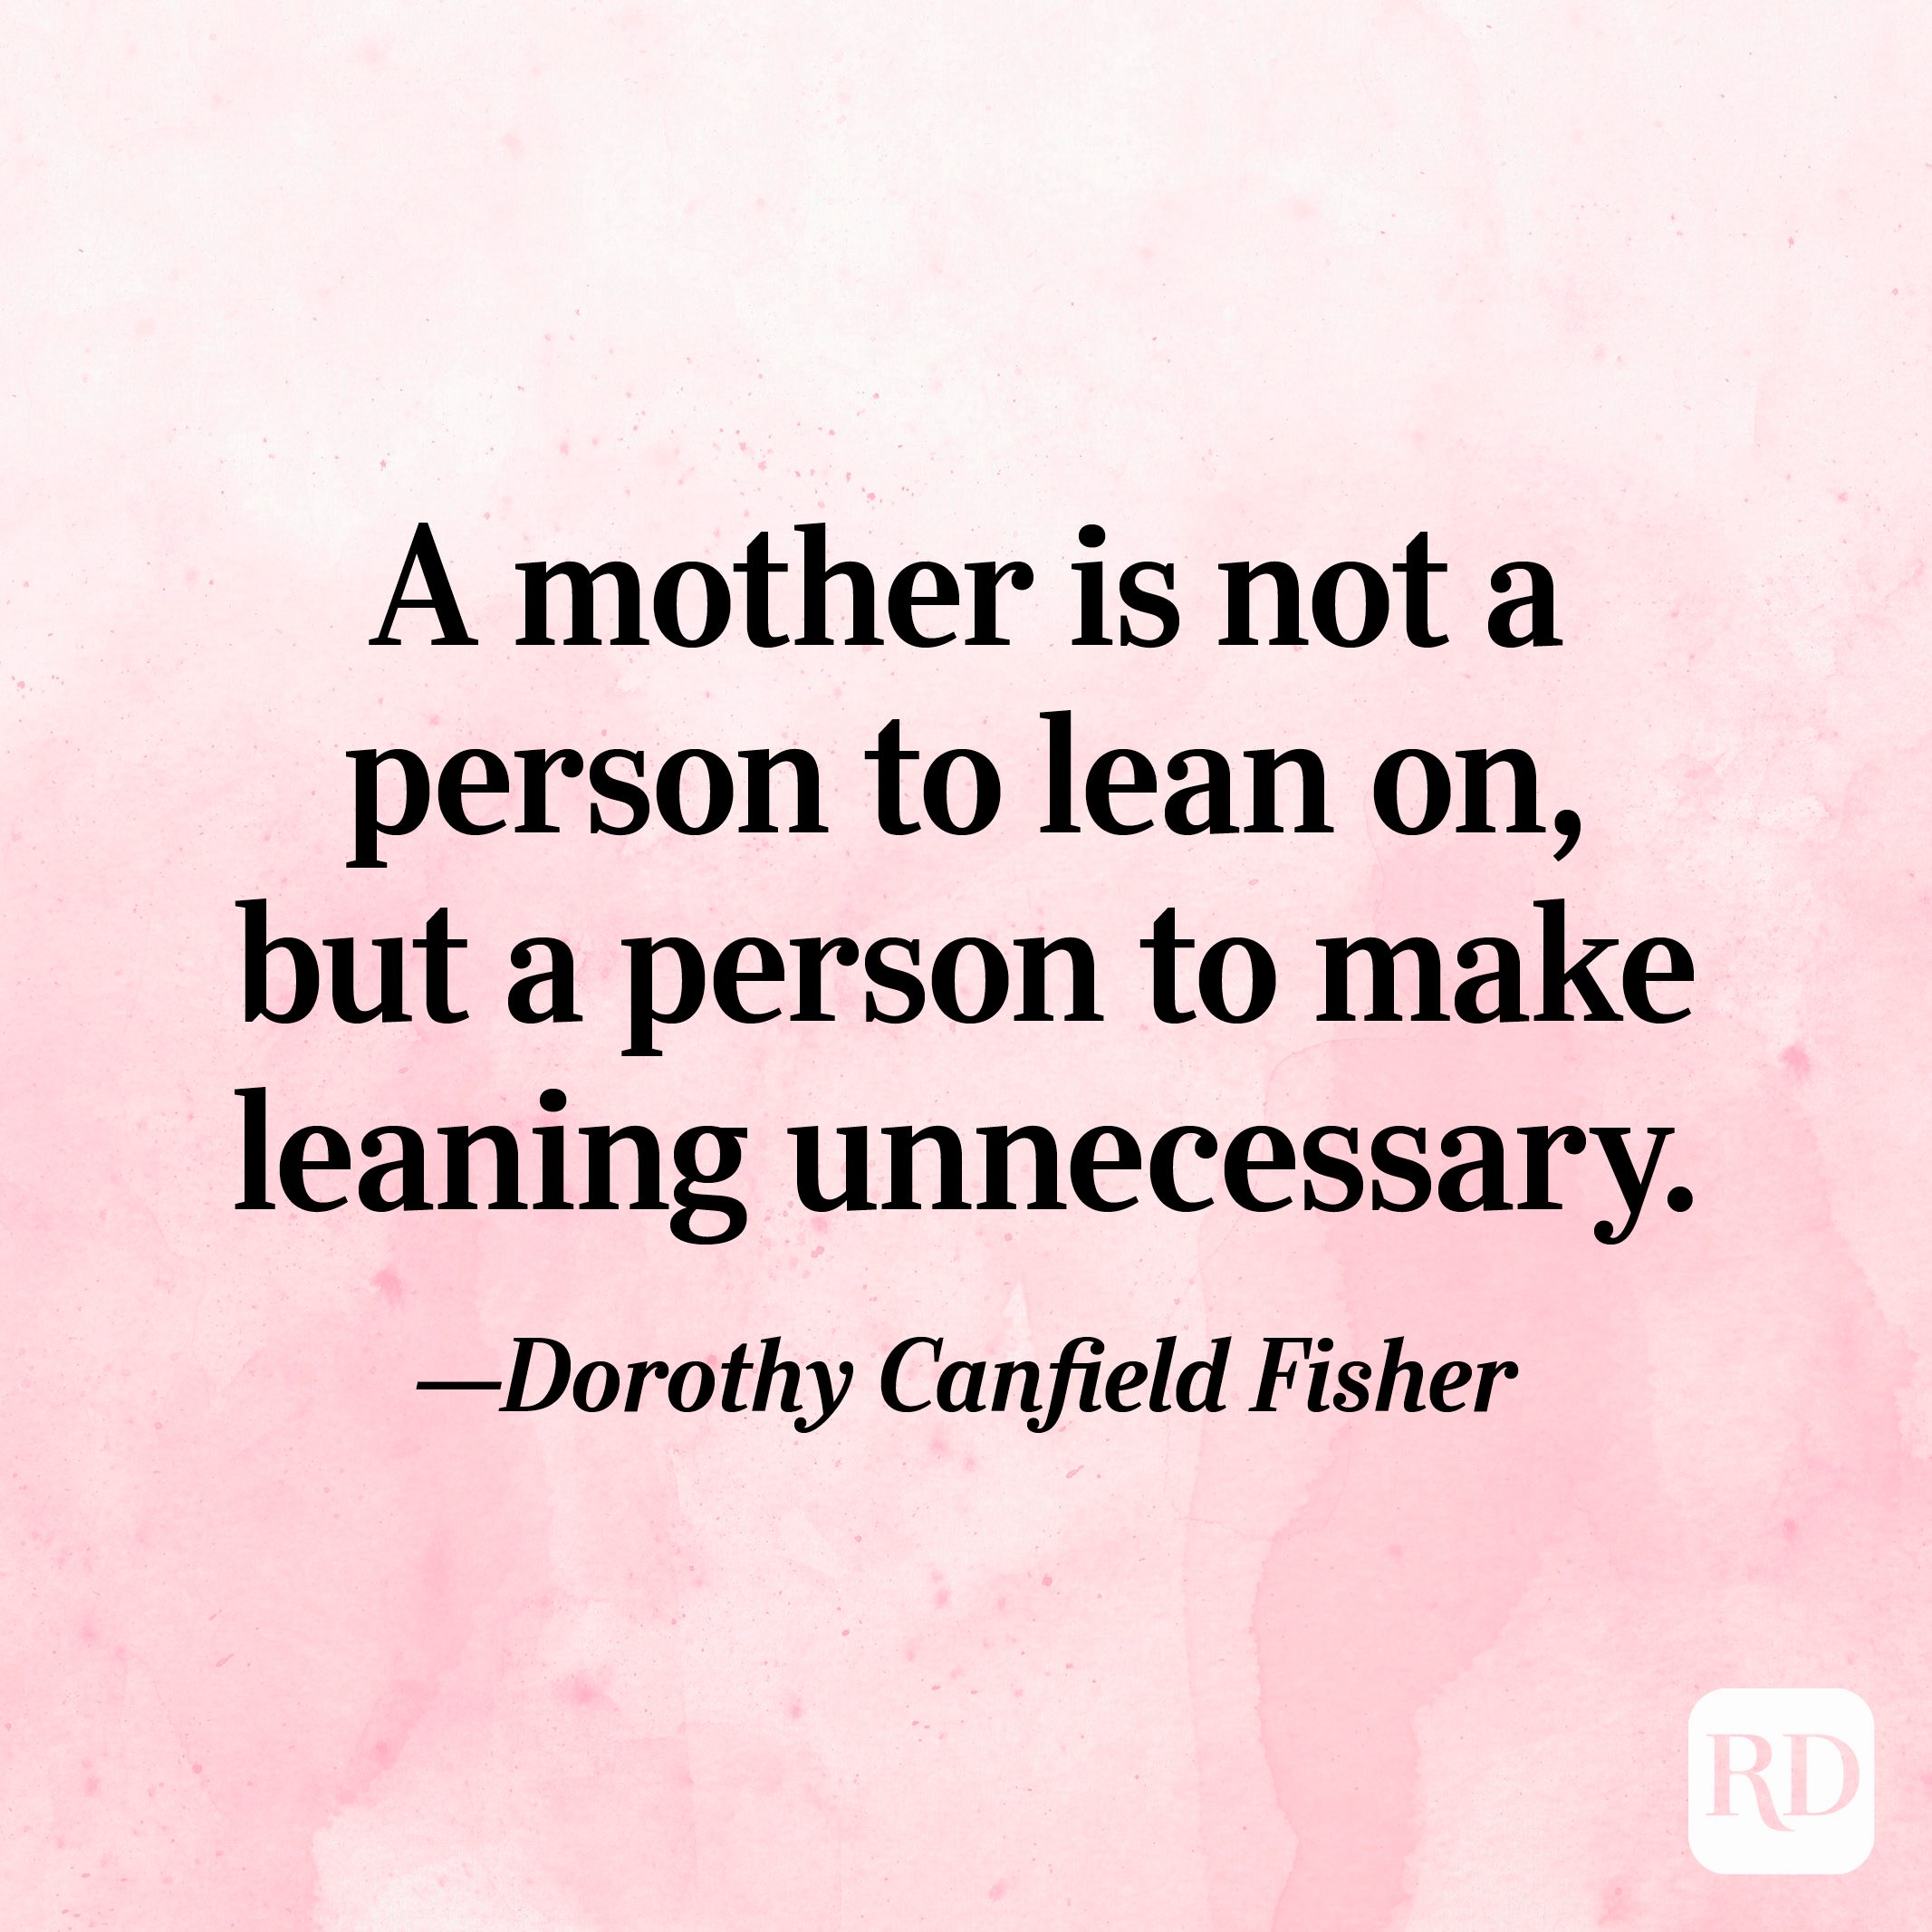 65 Mom Quotes That Show A Mother's Love